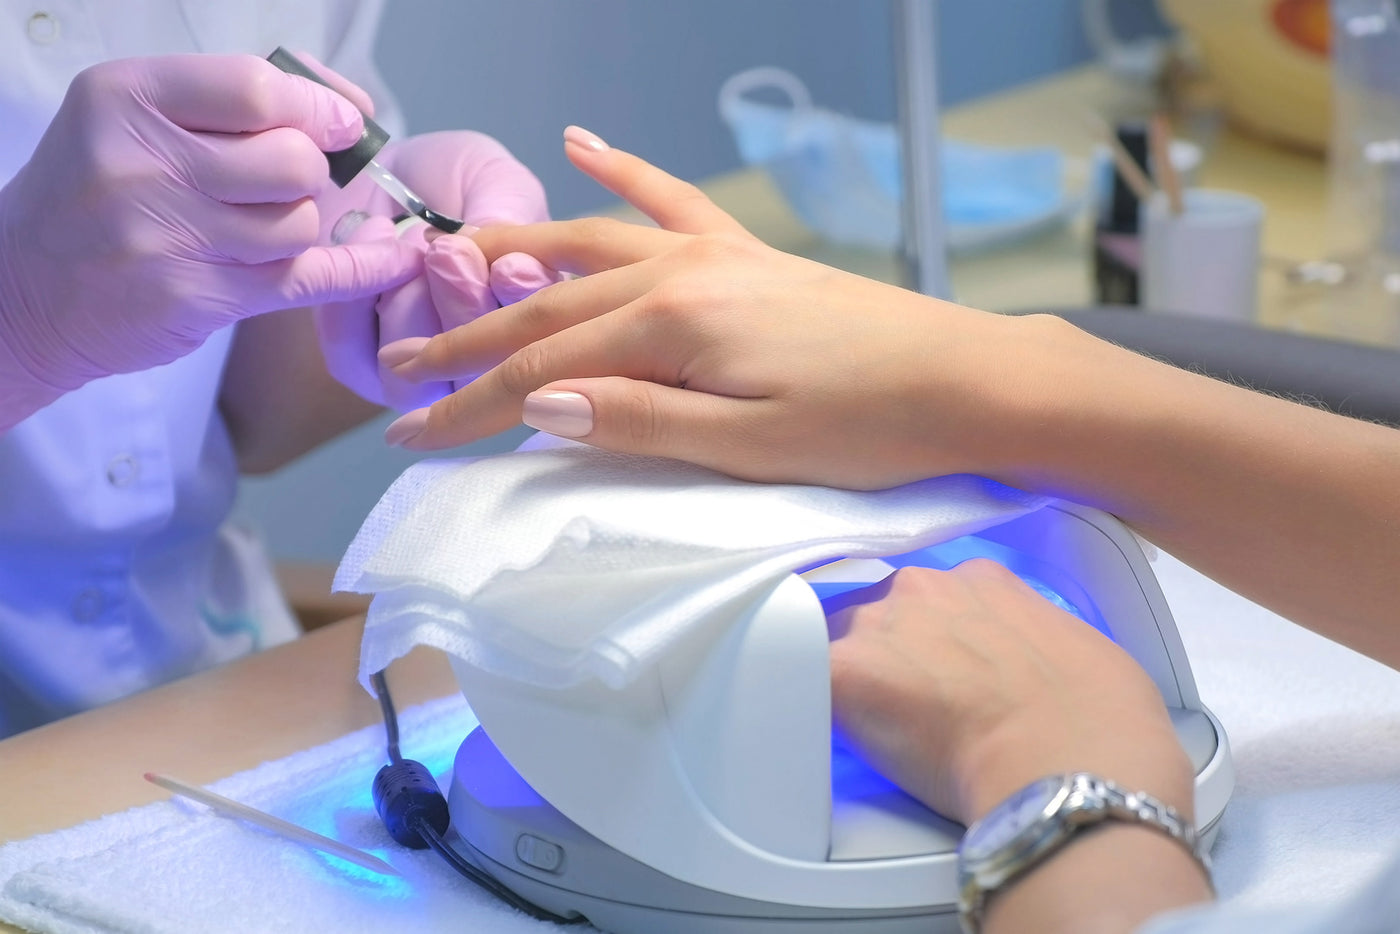 Woman with hand in UV lamp receiving manicure with other hand.